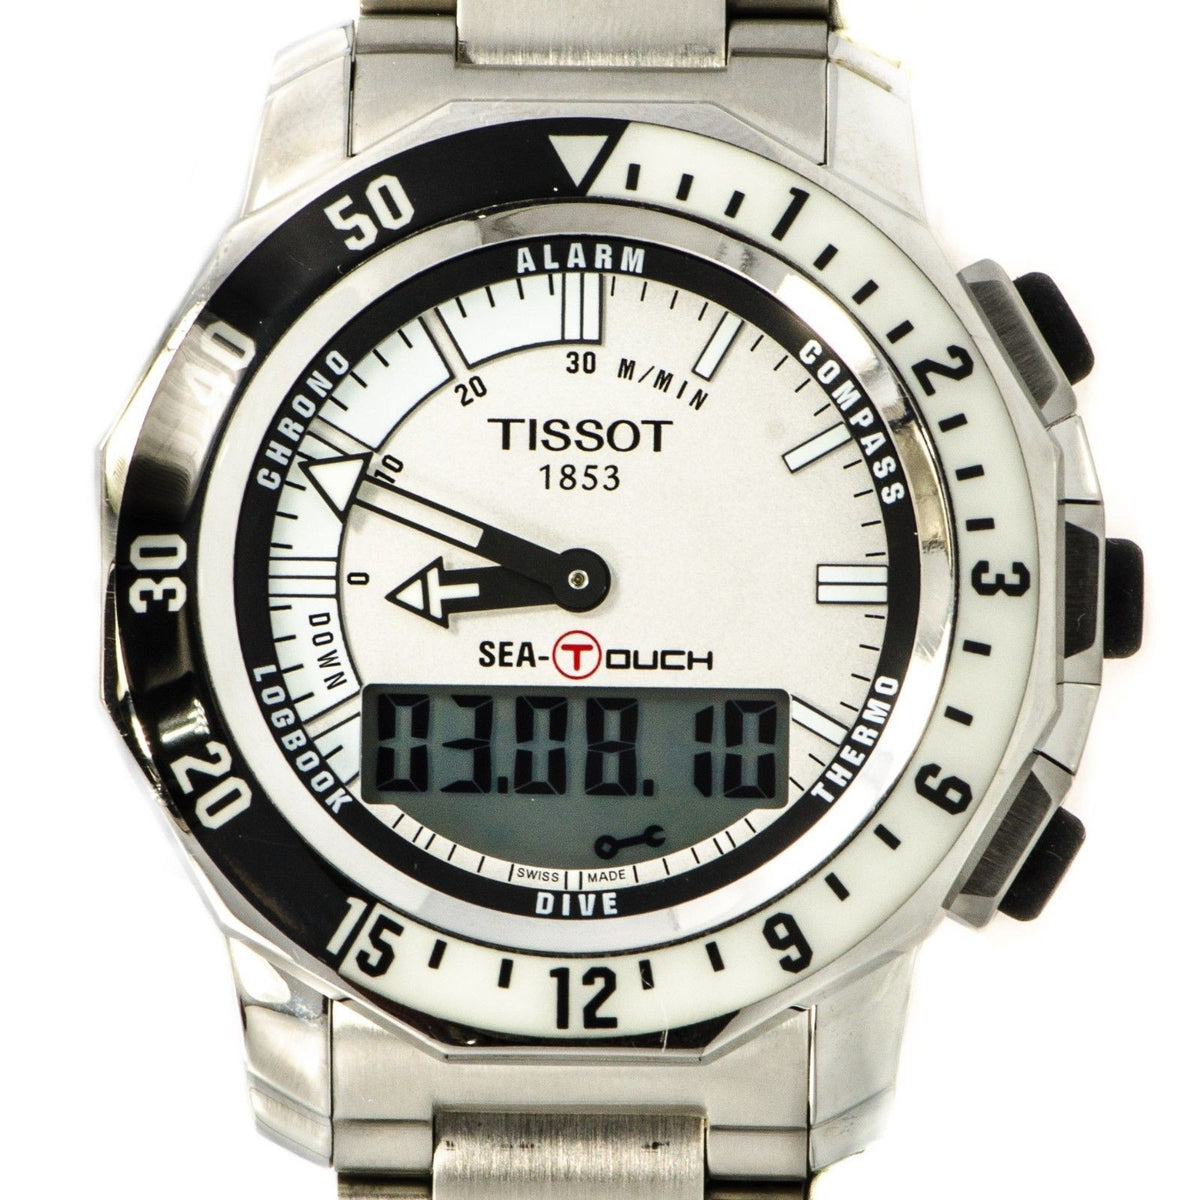 Tissot T026420A Stainless Steel White Dial Alarm Compass Digital Mens Watch